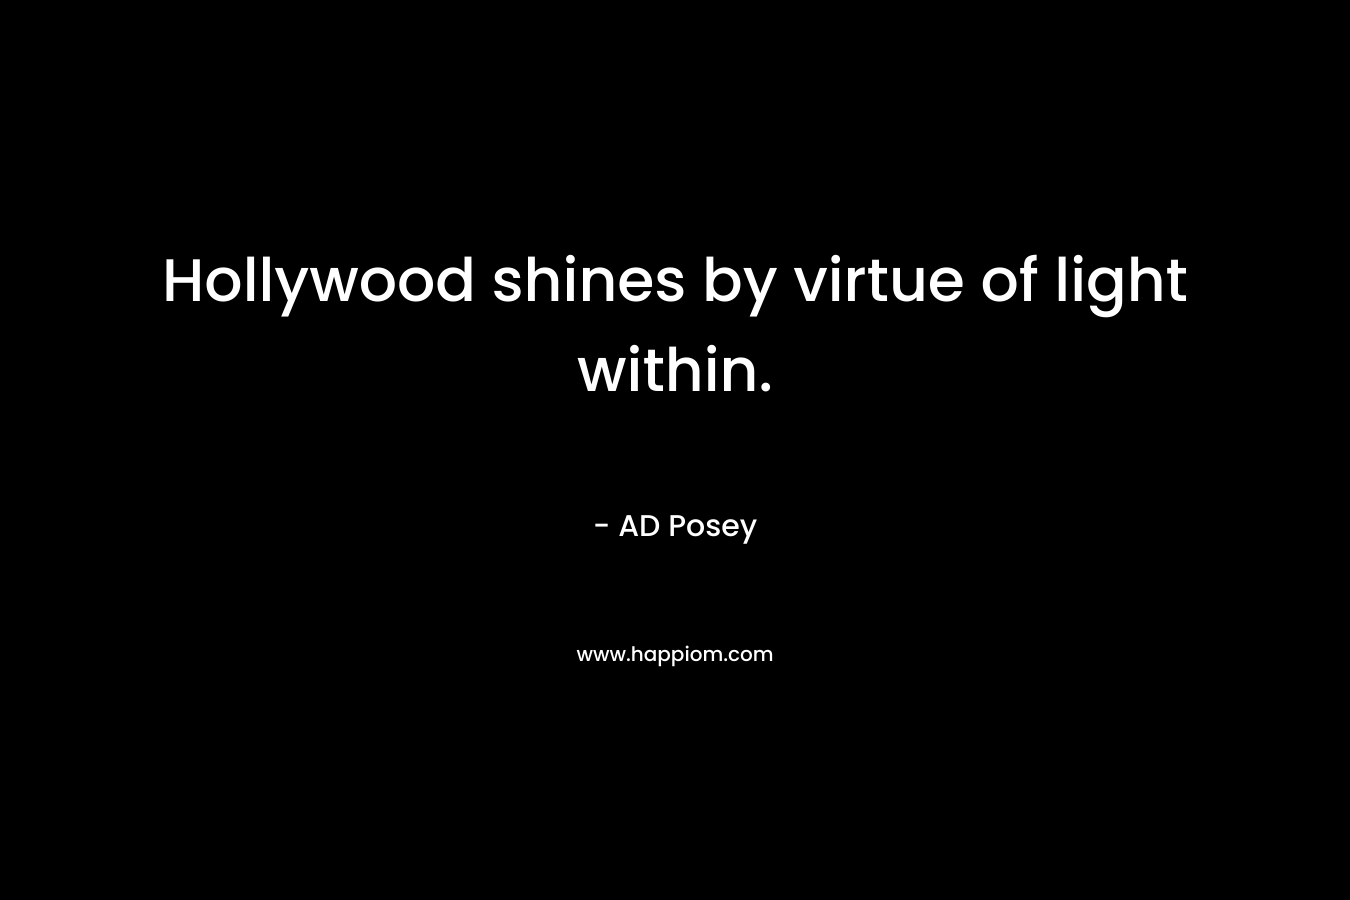 Hollywood shines by virtue of light within.